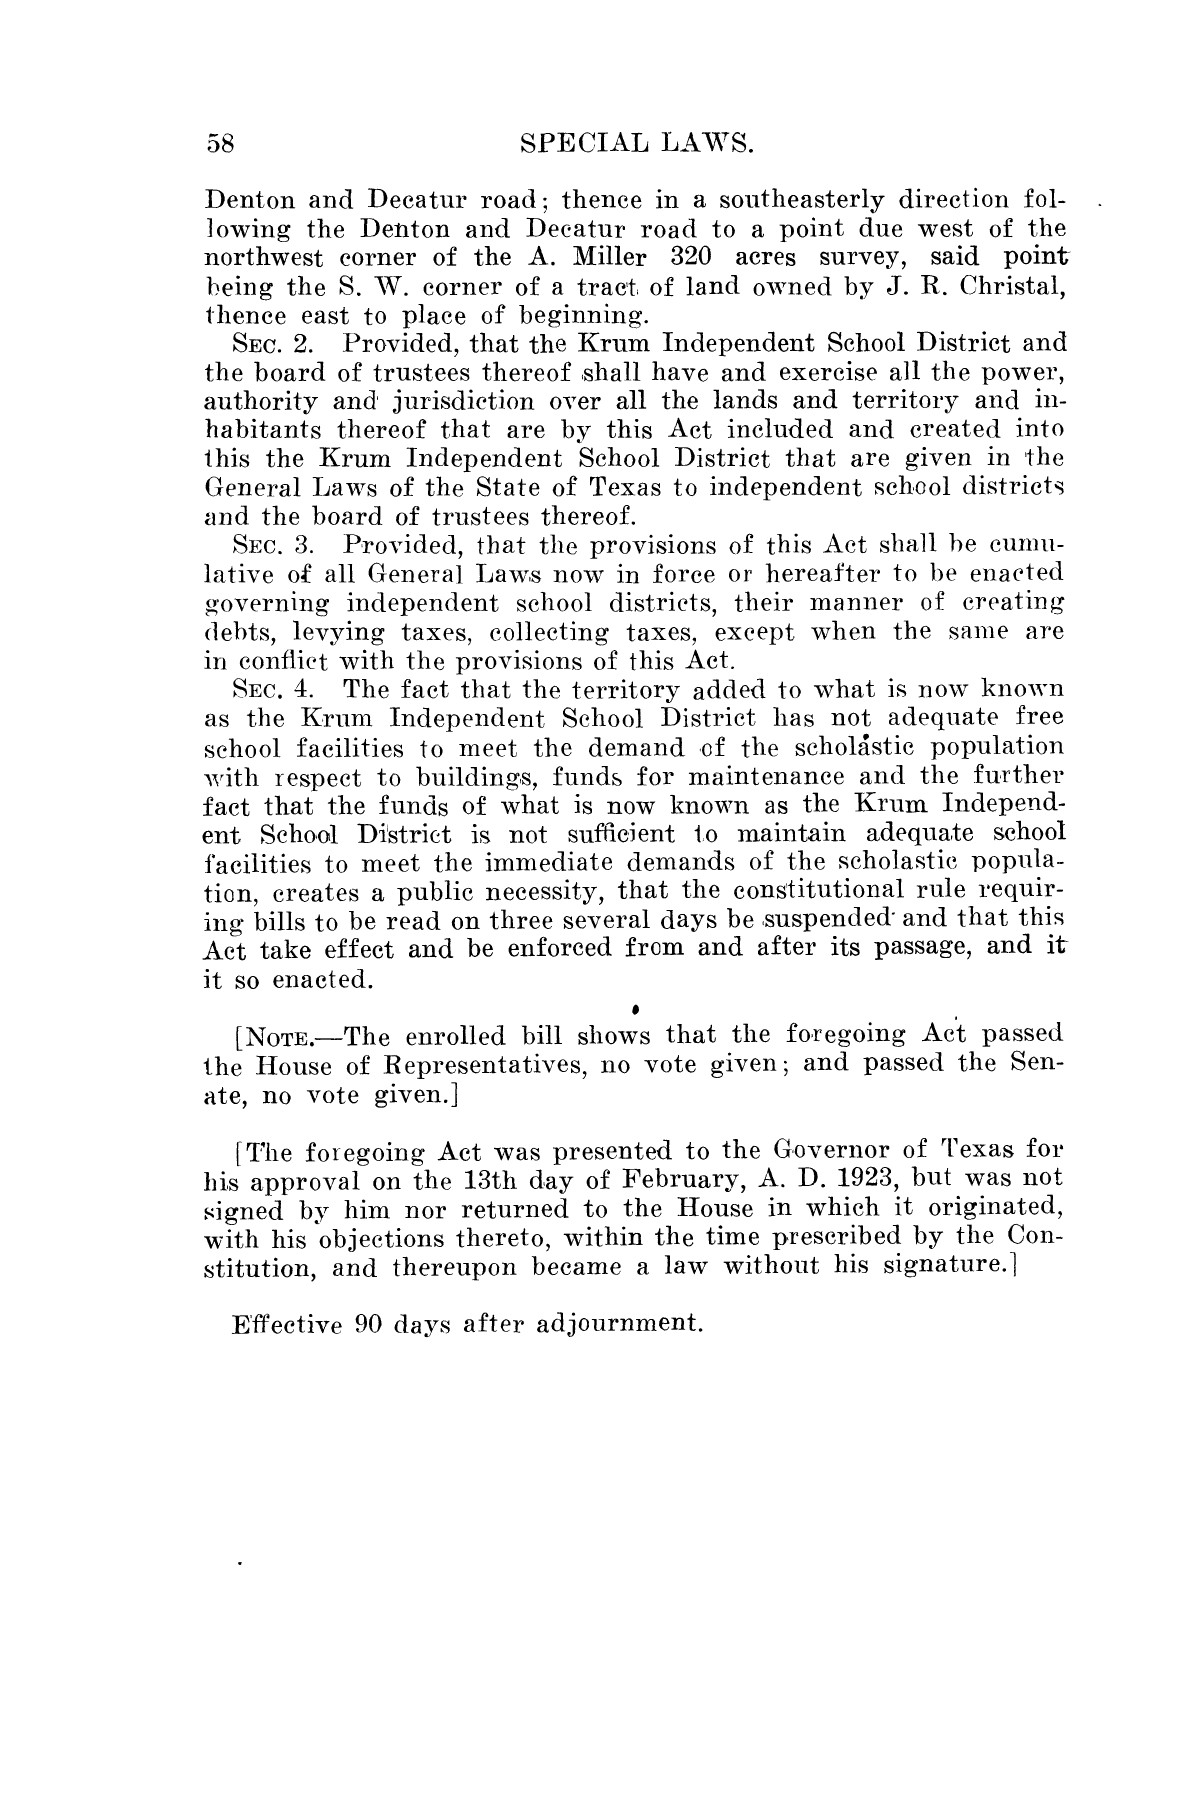 The Laws of Texas, 1923-1925 [Volume 22]
                                                
                                                    [Sequence #]: 68 of 1648
                                                